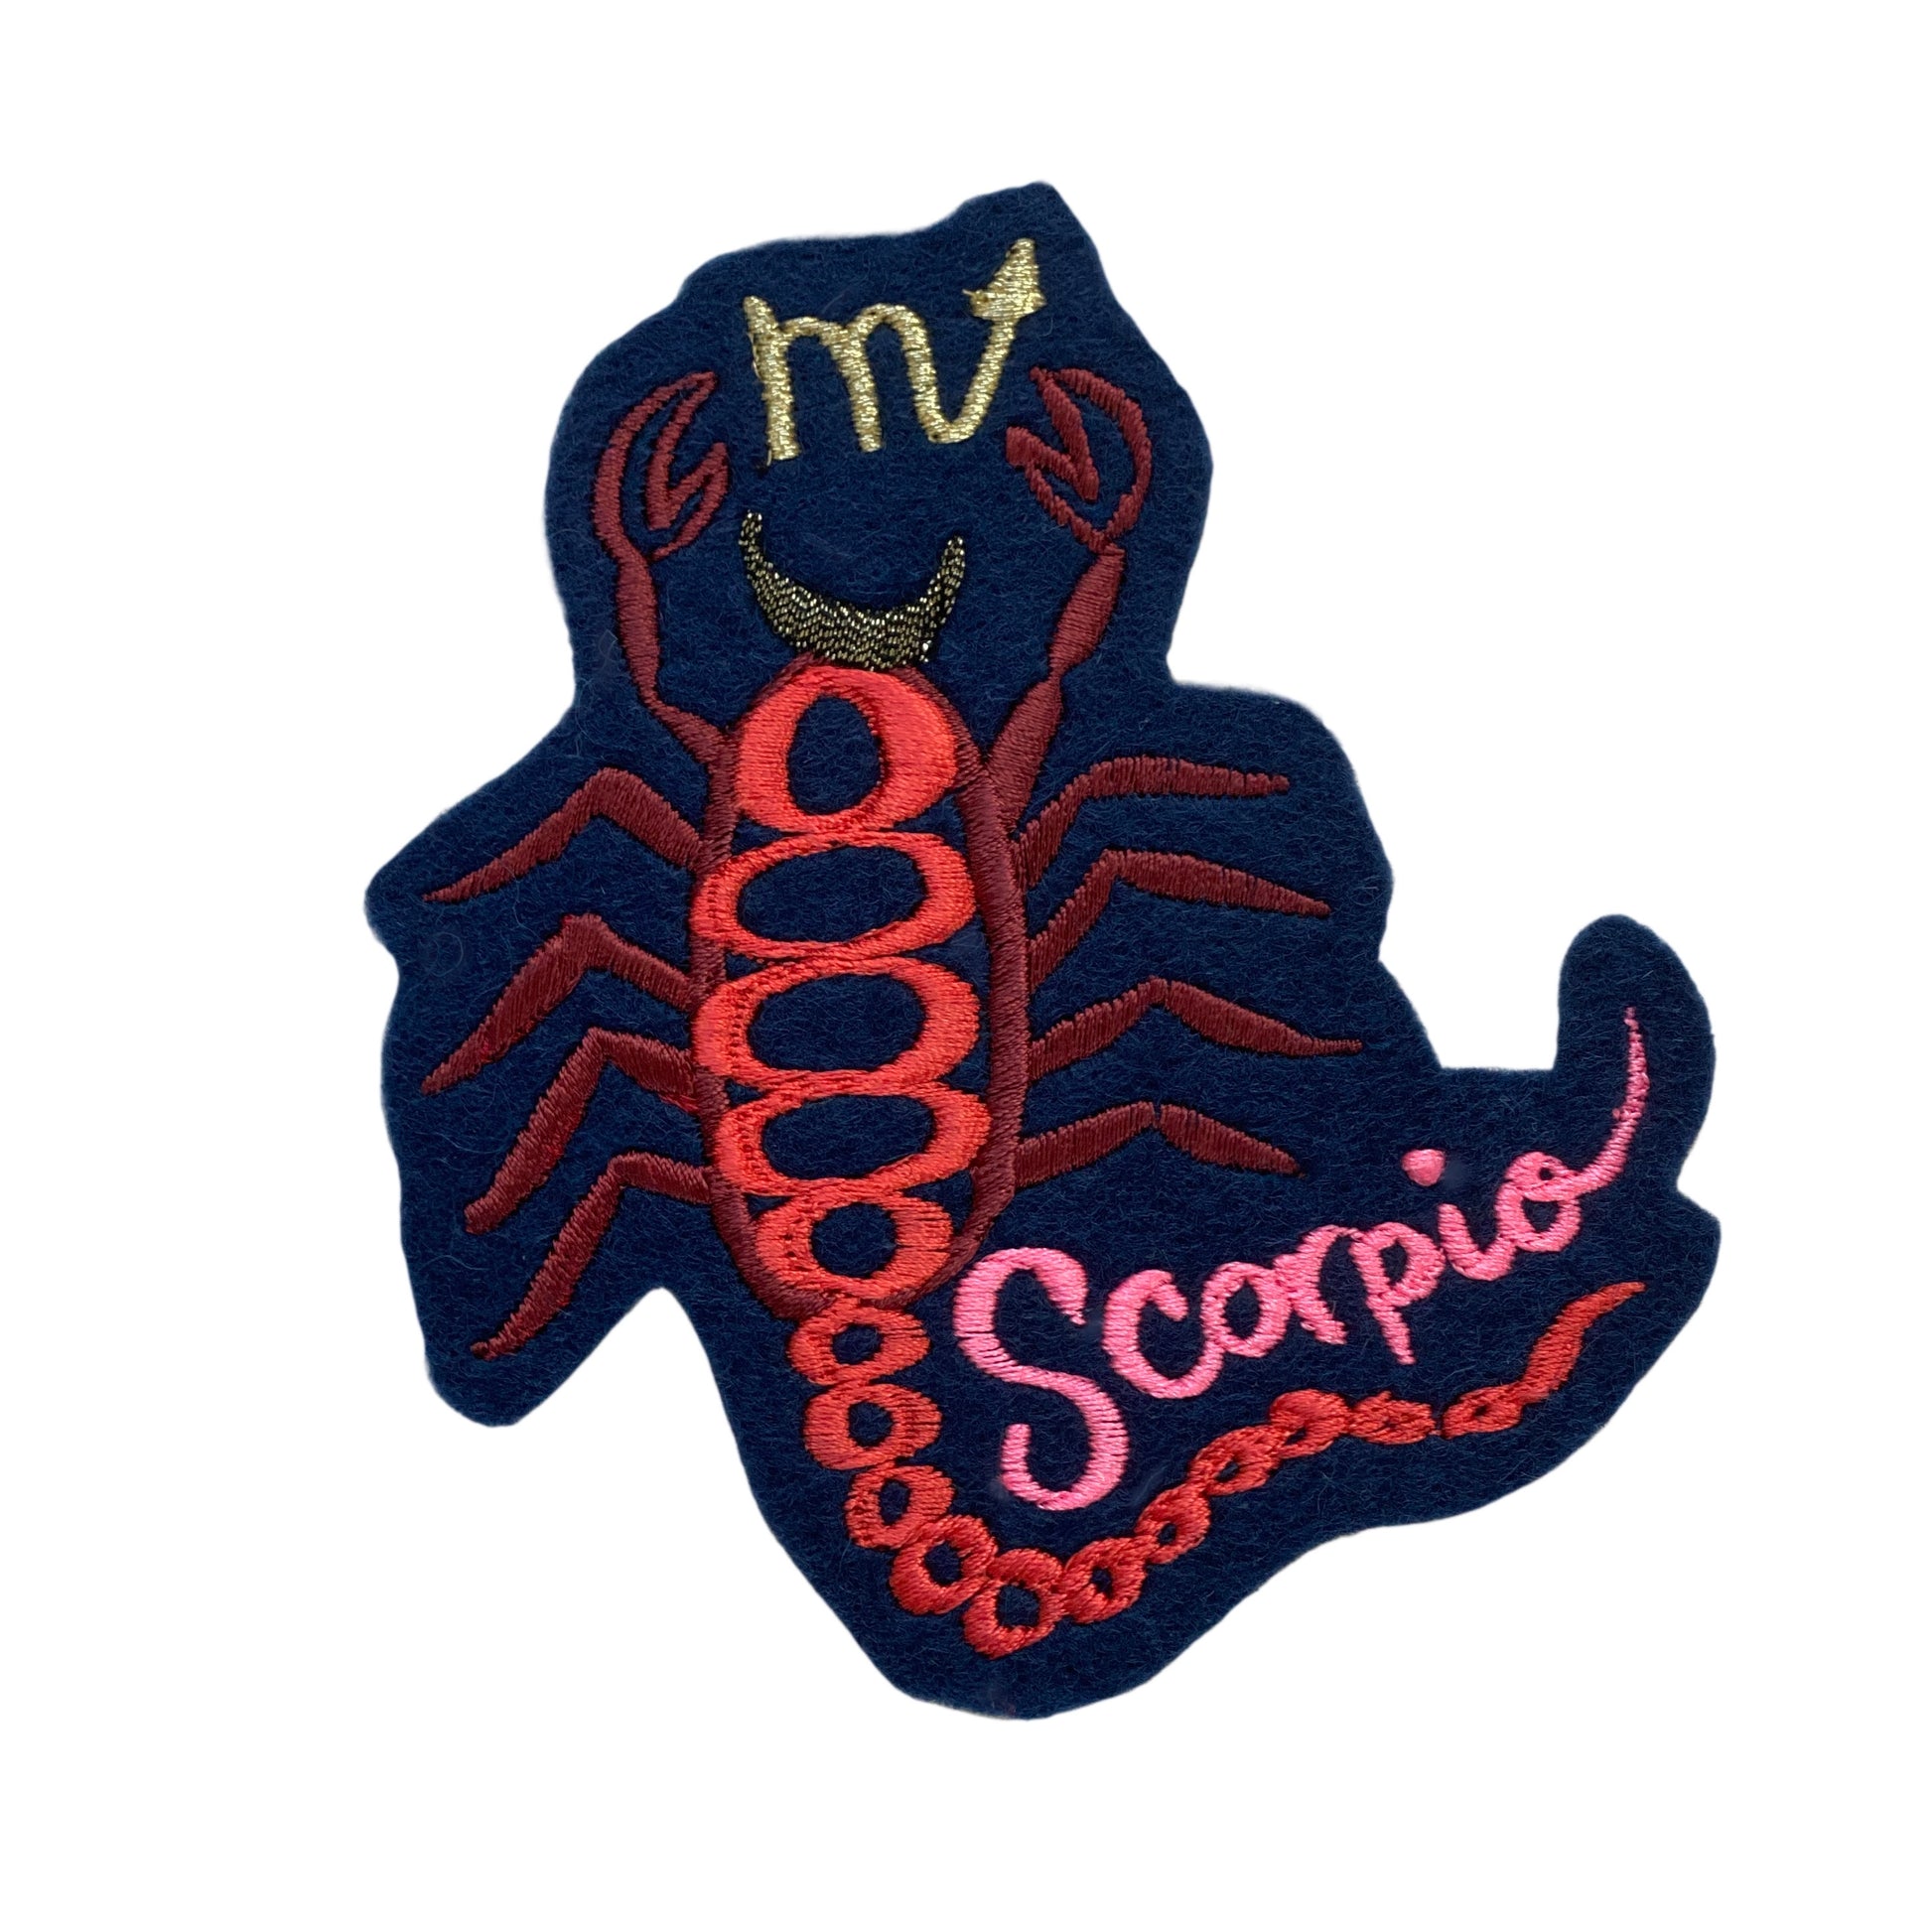 Scorpio embroidered patch on white background